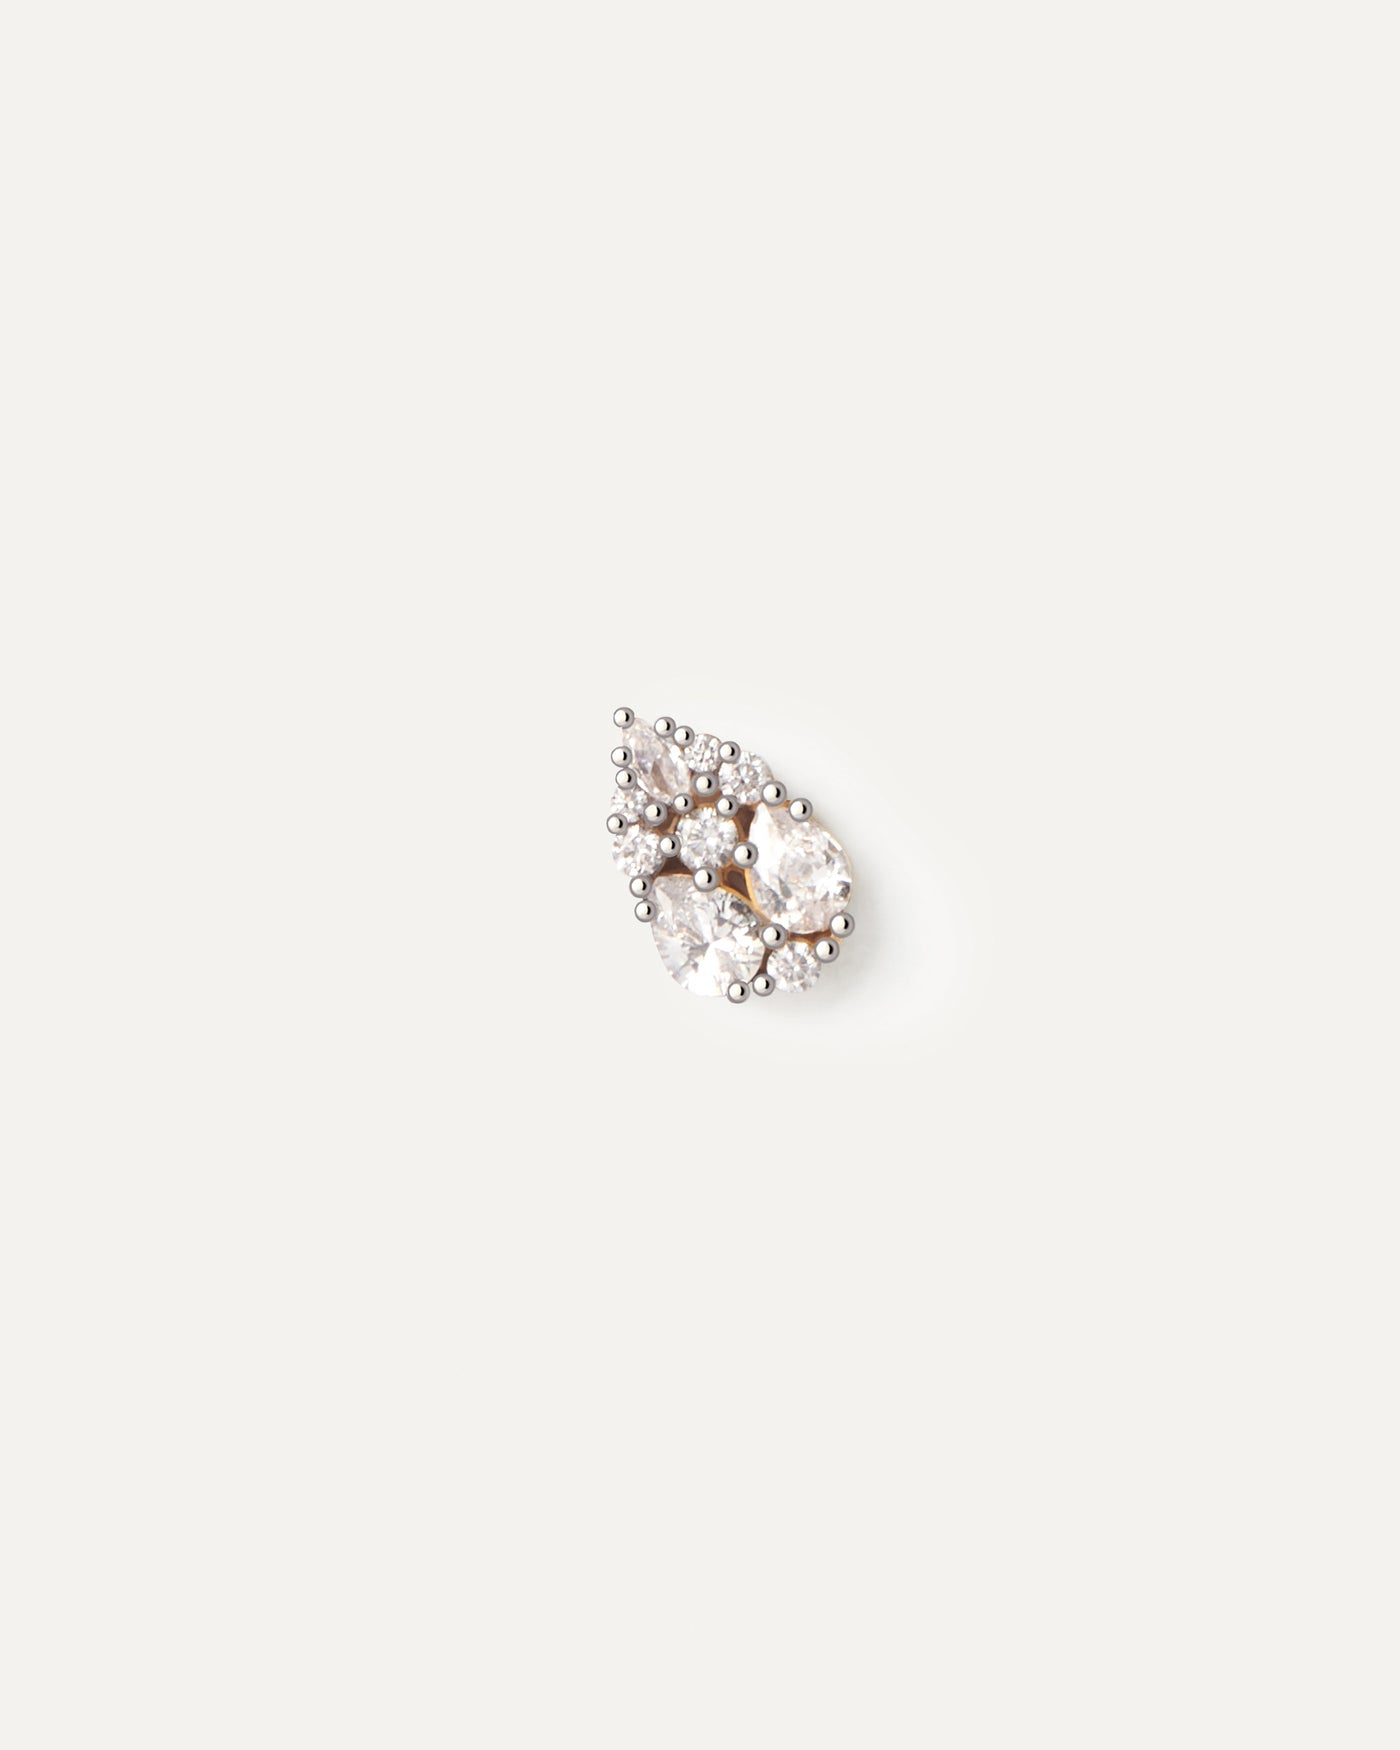 2023 Selection | Vanilla Single Earring. Gold-plated stud earring set with pear shape white zirconia multi-stone cluster. Get the latest arrival from PDPAOLA. Place your order safely and get this Best Seller. Free Shipping.